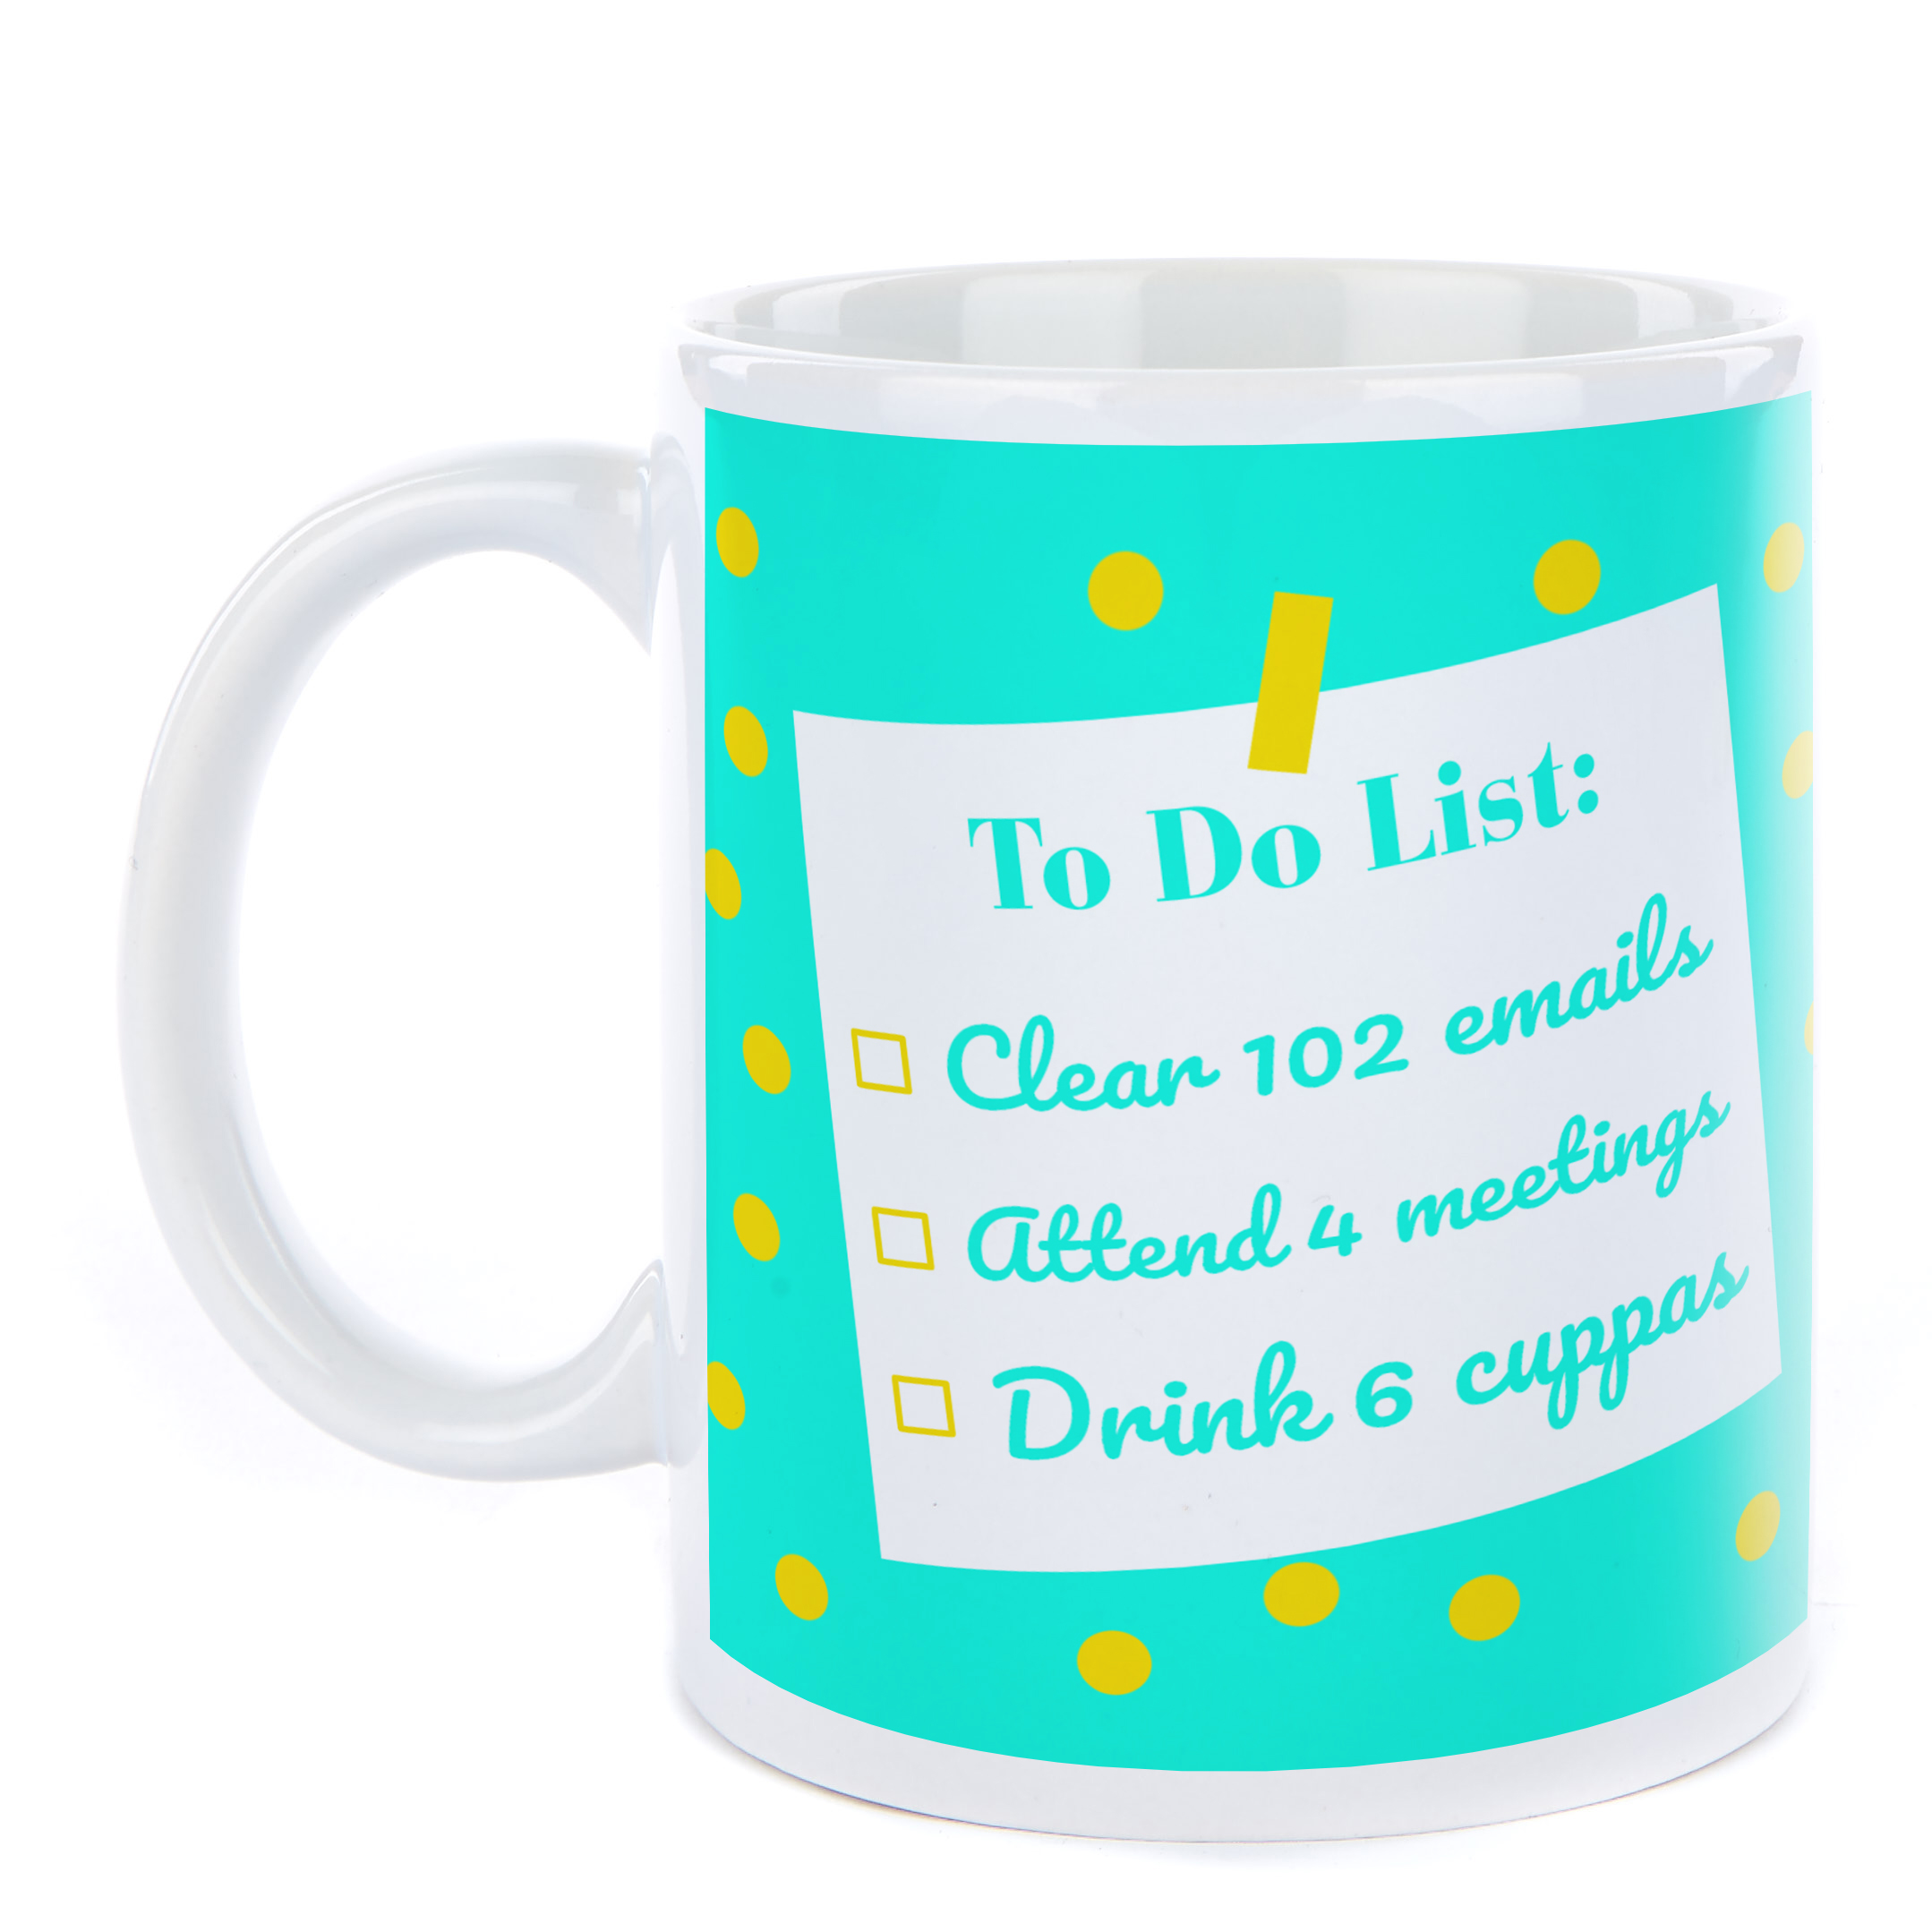 Personalised Mug - Working From Home To Do List